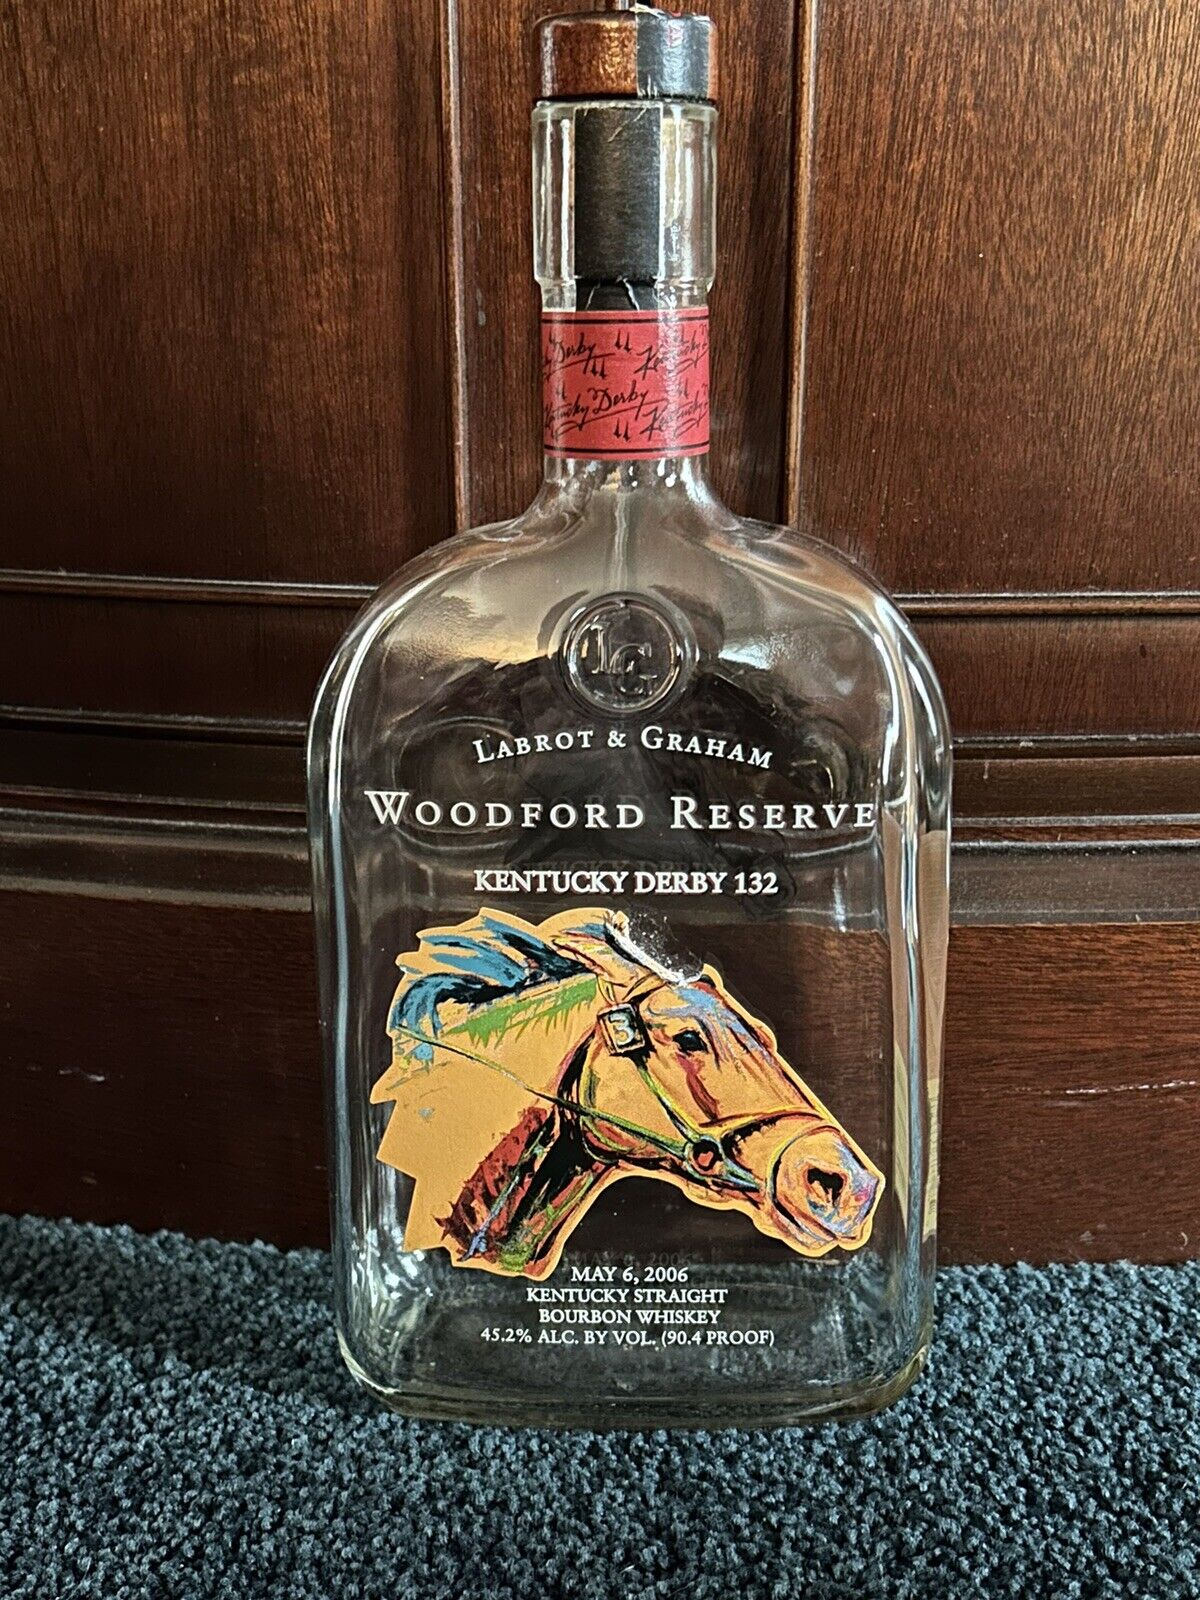 Woodford Reserve Labrot & Graham Kentucky Derby 132 Empty Bottle 2006